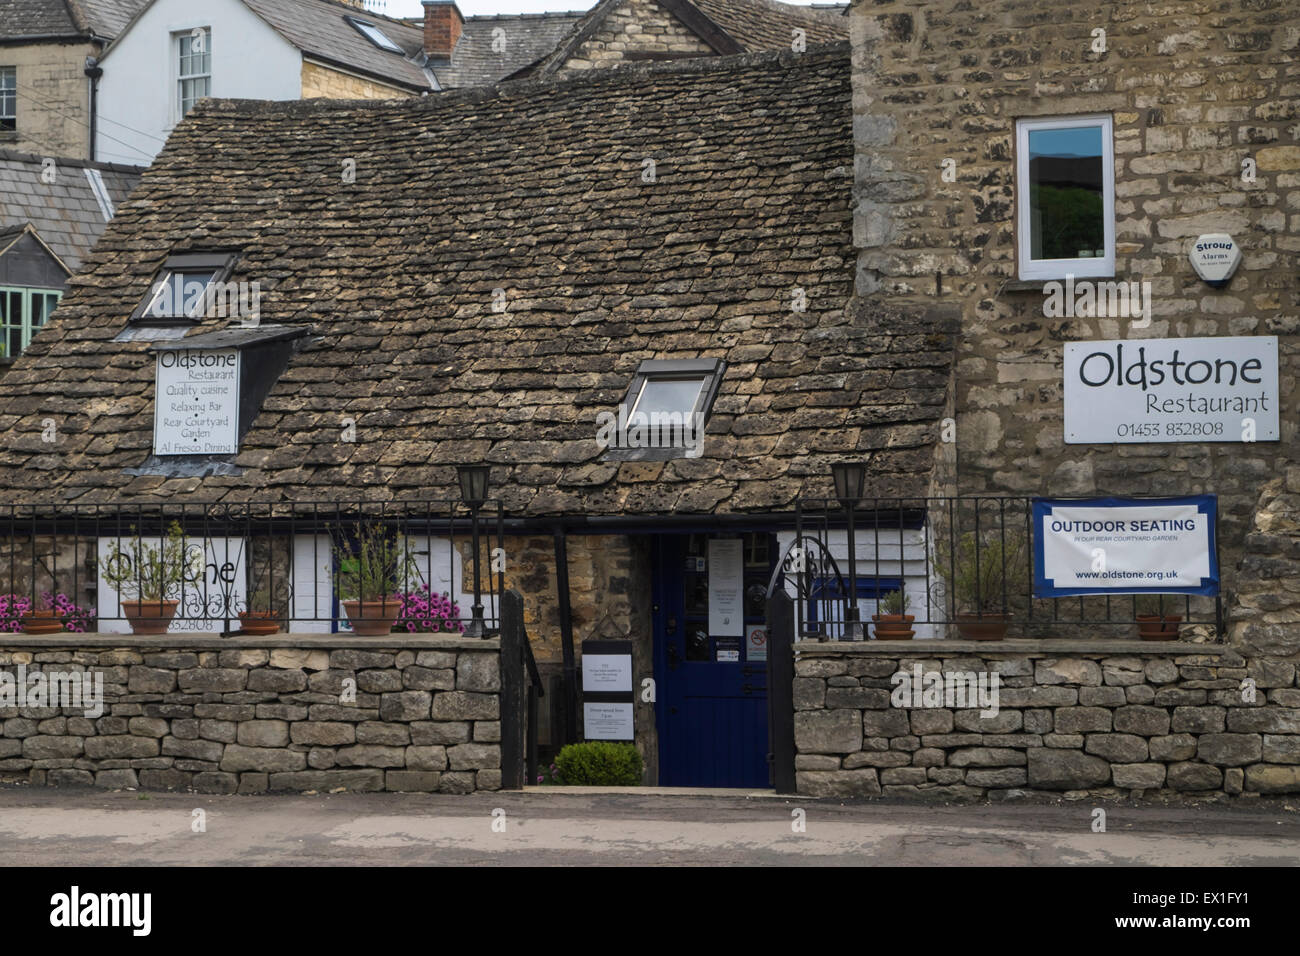 Nailsworth a small town in Gloucestershire Oldstone Restaurant Stock Photo